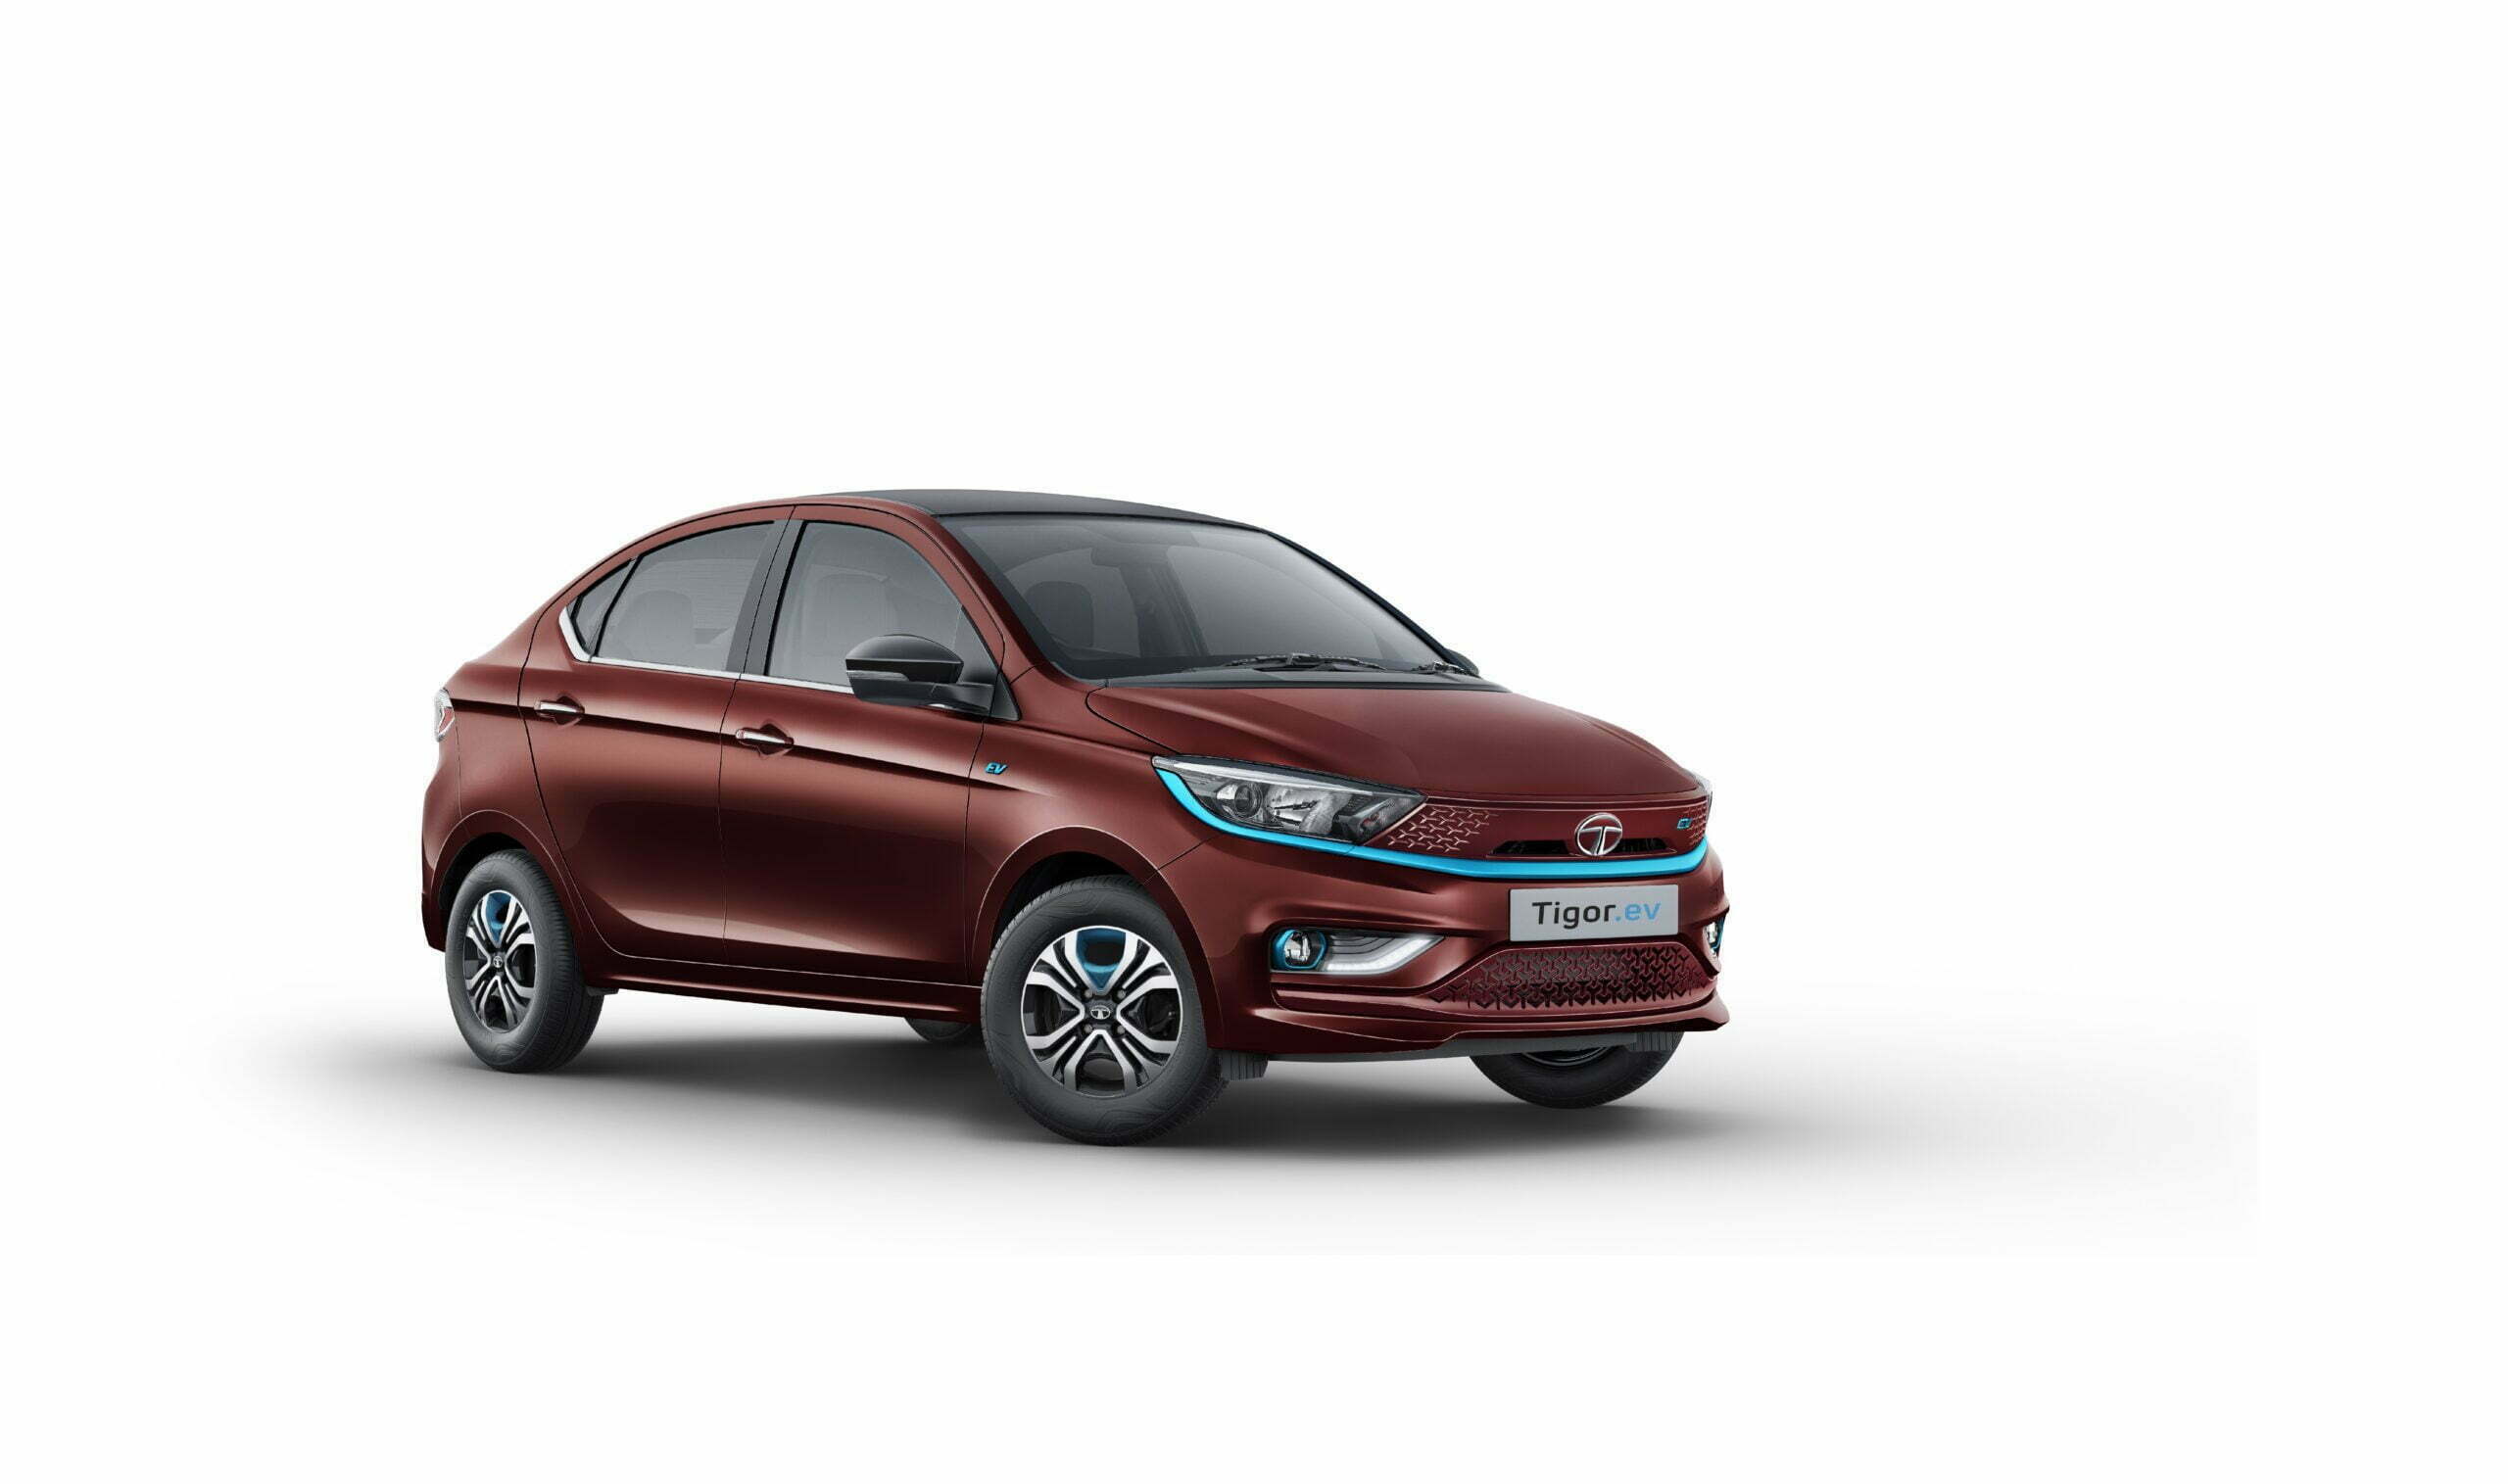 2022 Tata Tigor EV Launched With More Range And Features (1)